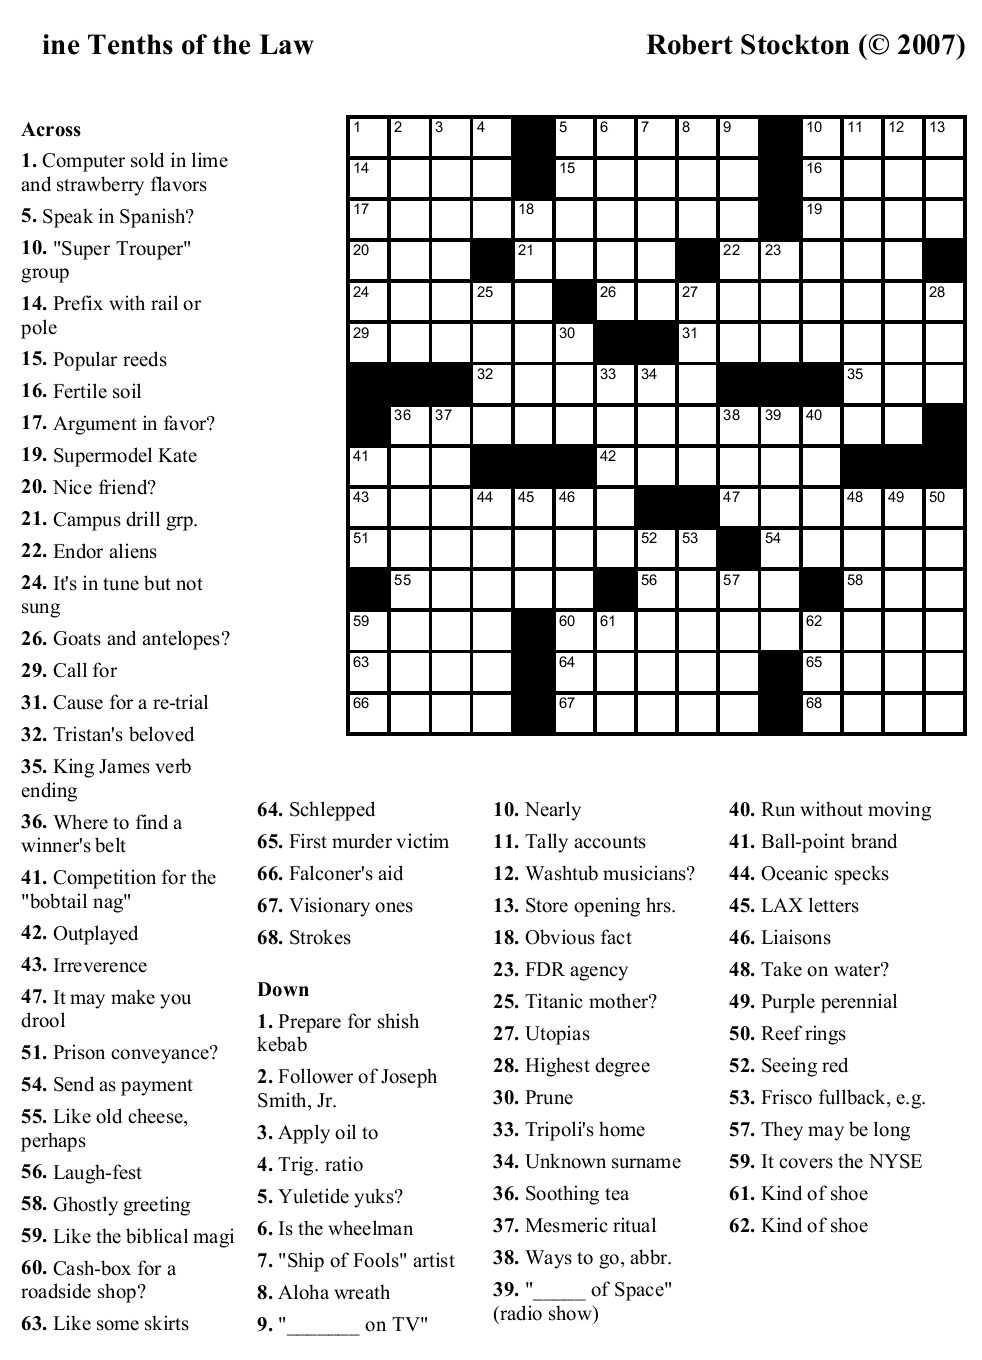 Crossword Puzzles Printable - Yahoo Image Search Results | Crossword - Printable Sports Crossword Puzzles